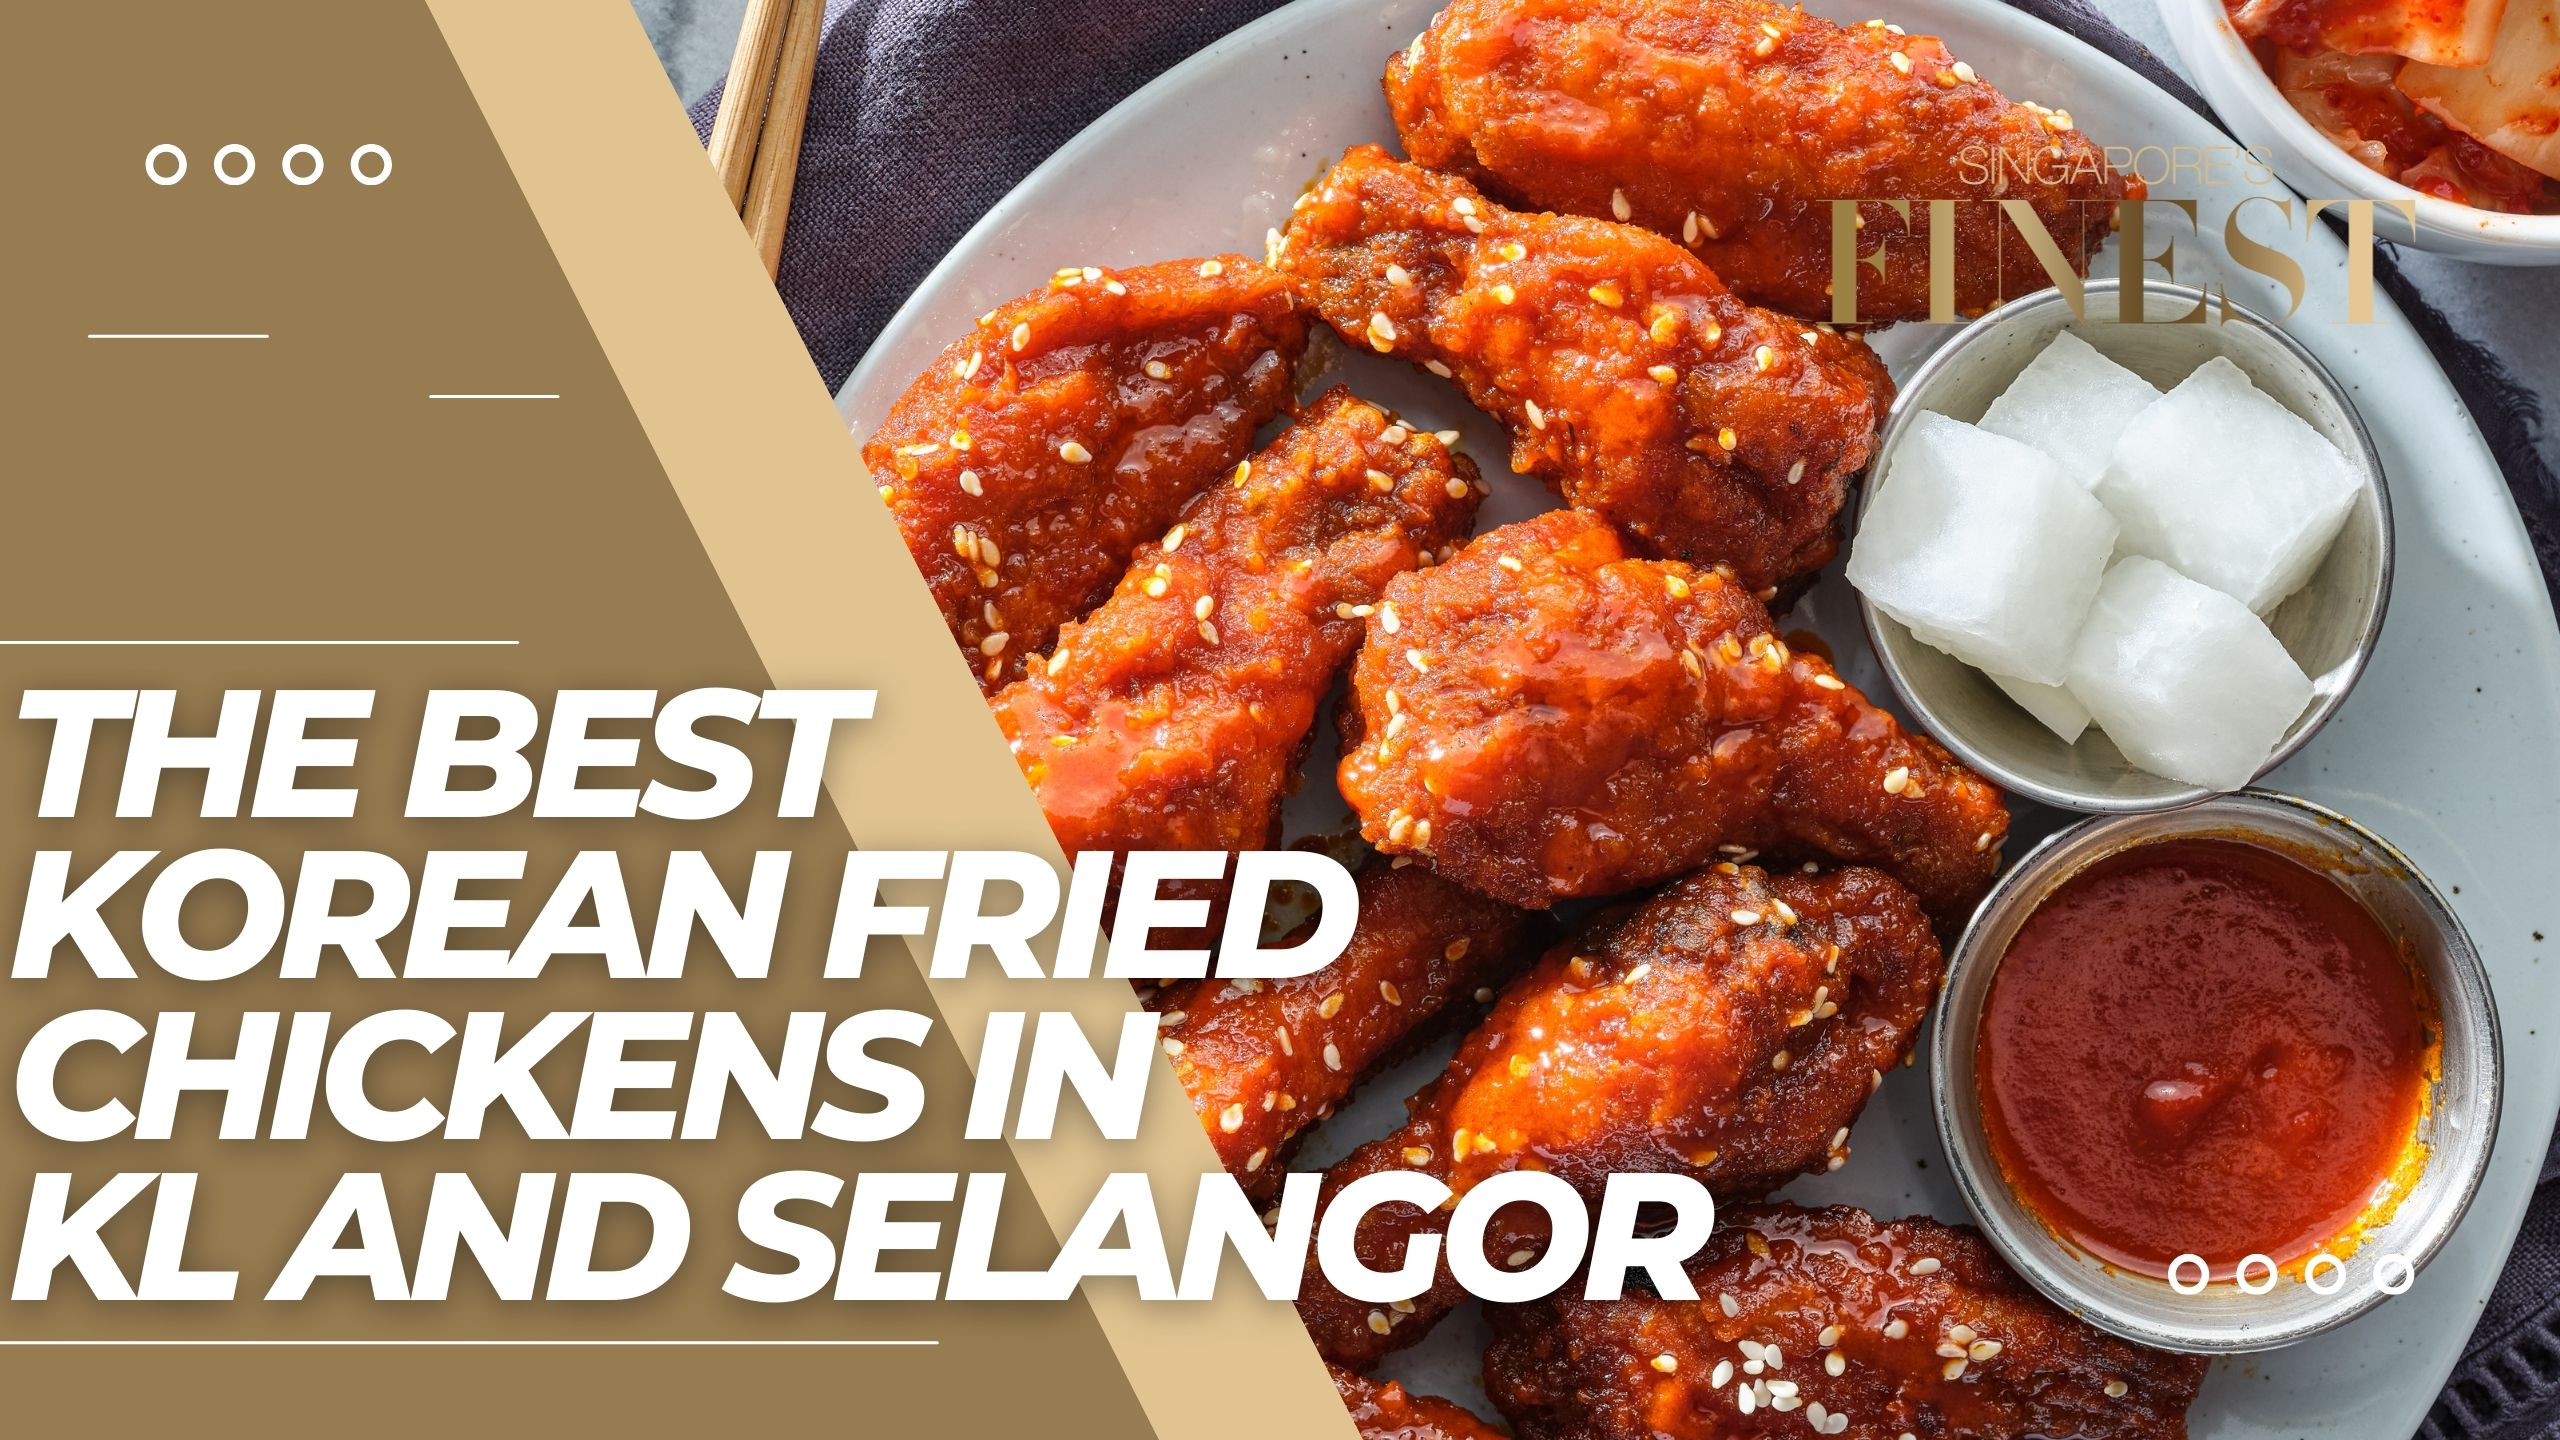 The Finest Korean Fried Chickens in KL and Selangor